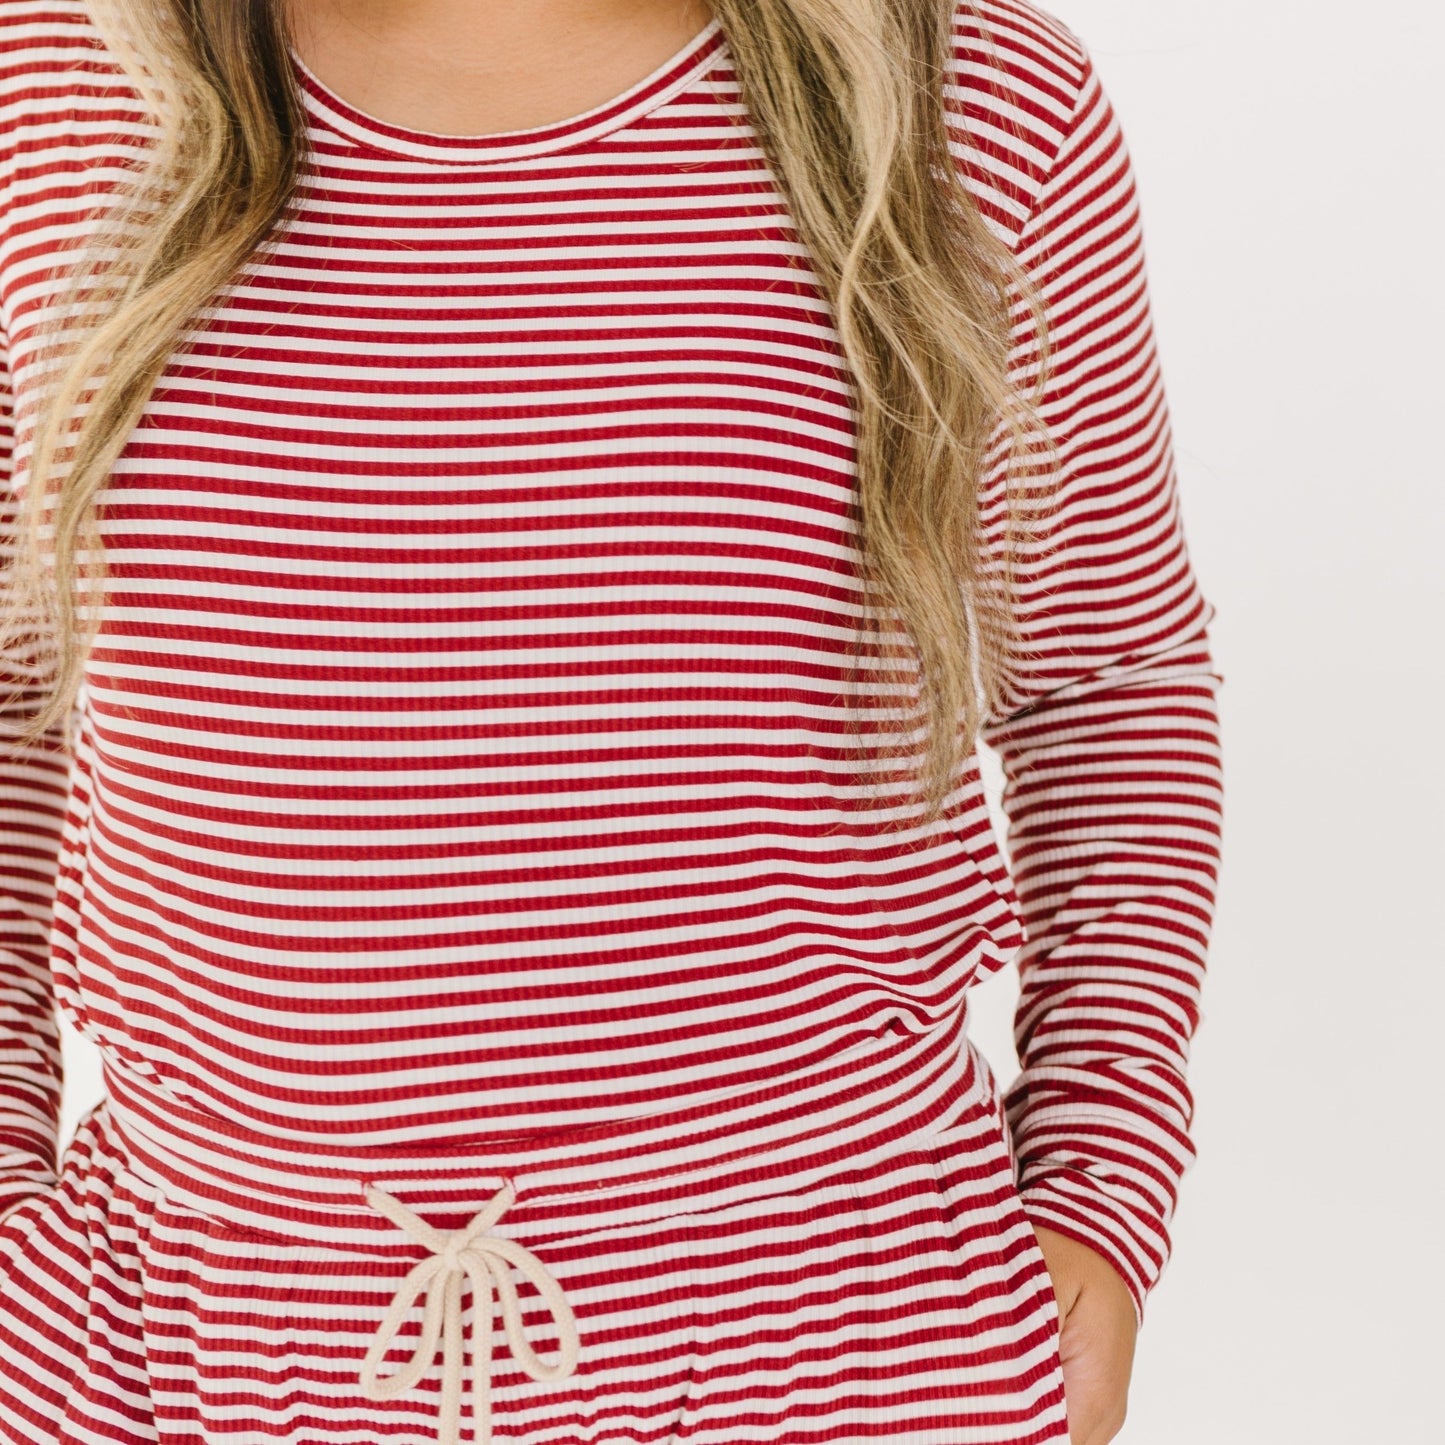 Red Stripe Ribbed Women's Top